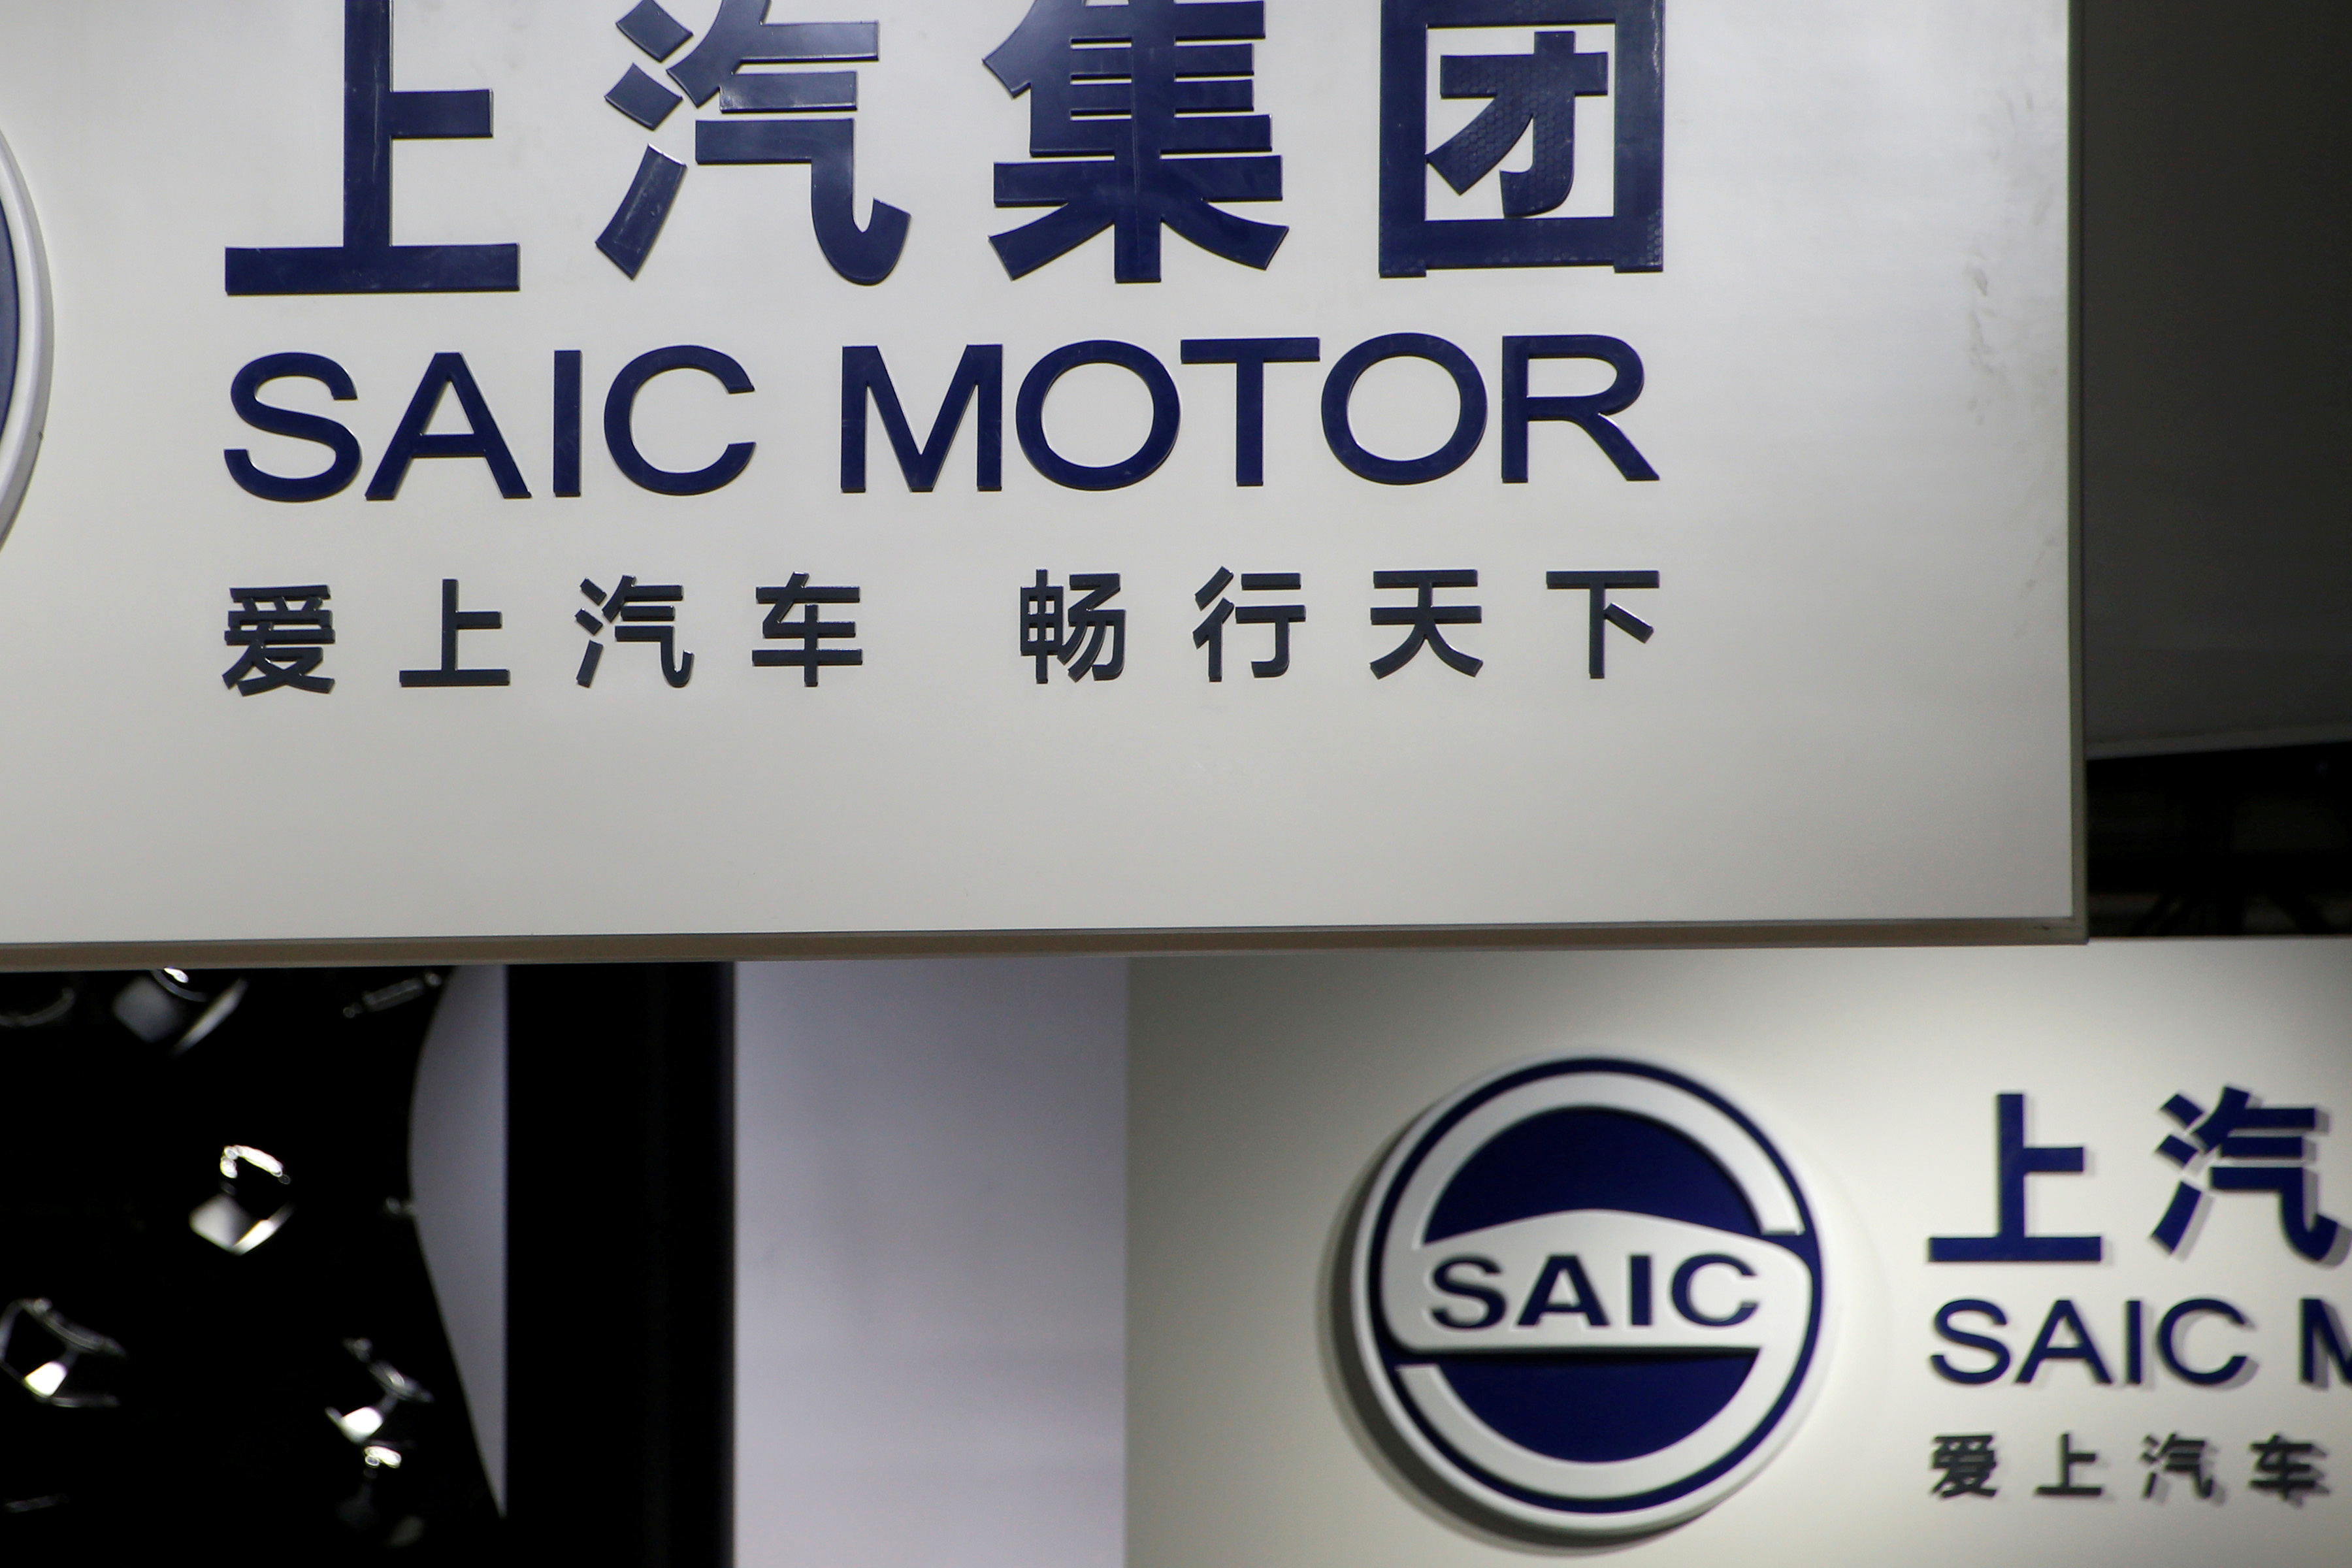 SAIC Motor Corp's logos are pictured at its booth during the Auto China 2016 auto show in Beijing, China April 26, 2016. REUTERS/Kim Kyung-Hoon/File Photo